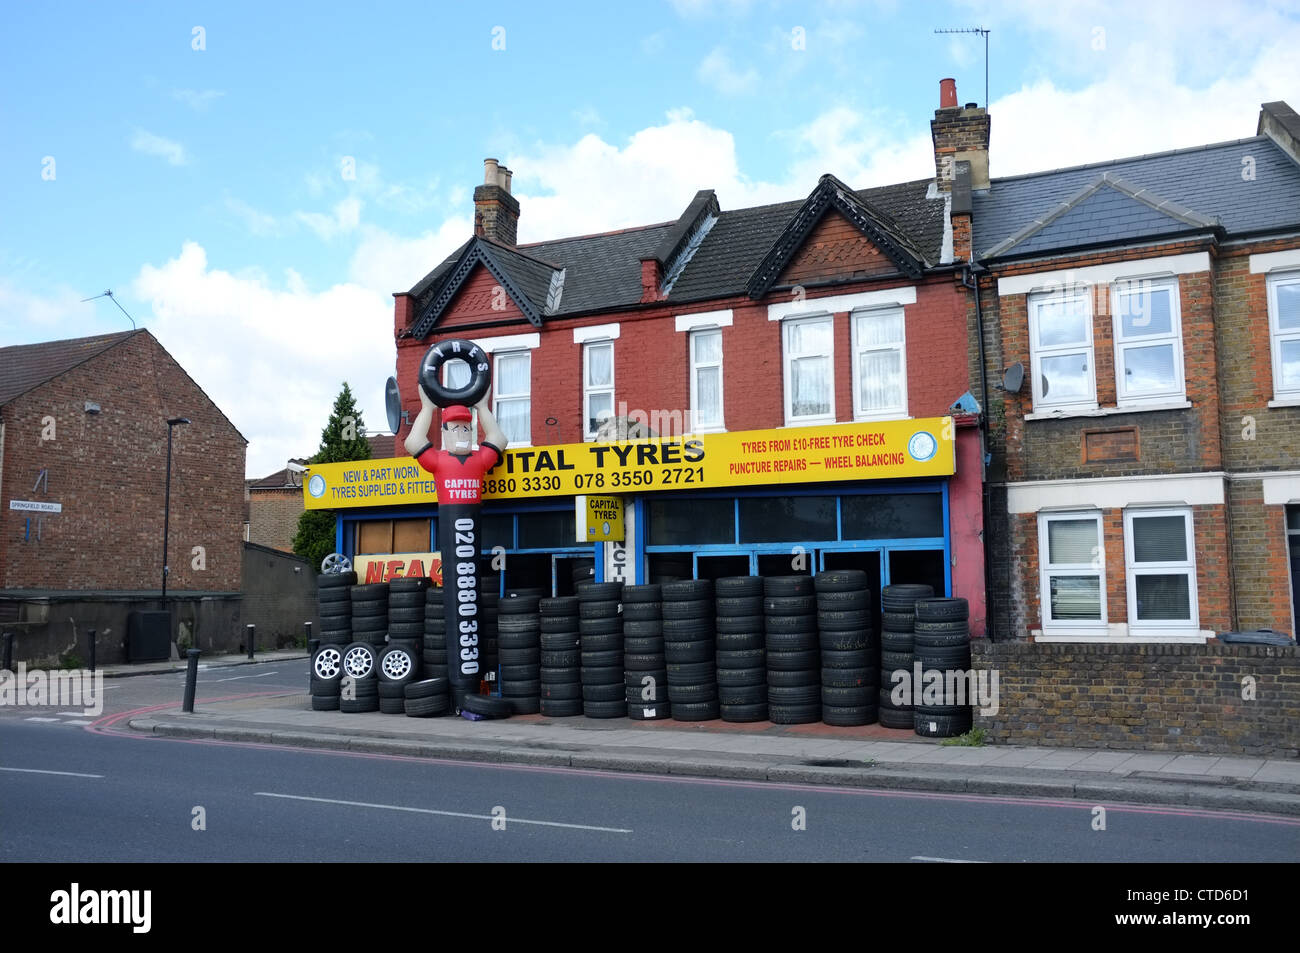 Car tyres and wheels for sale at Capital Tyres 173 Broad Lane London N15 4QT UK Stock Photo